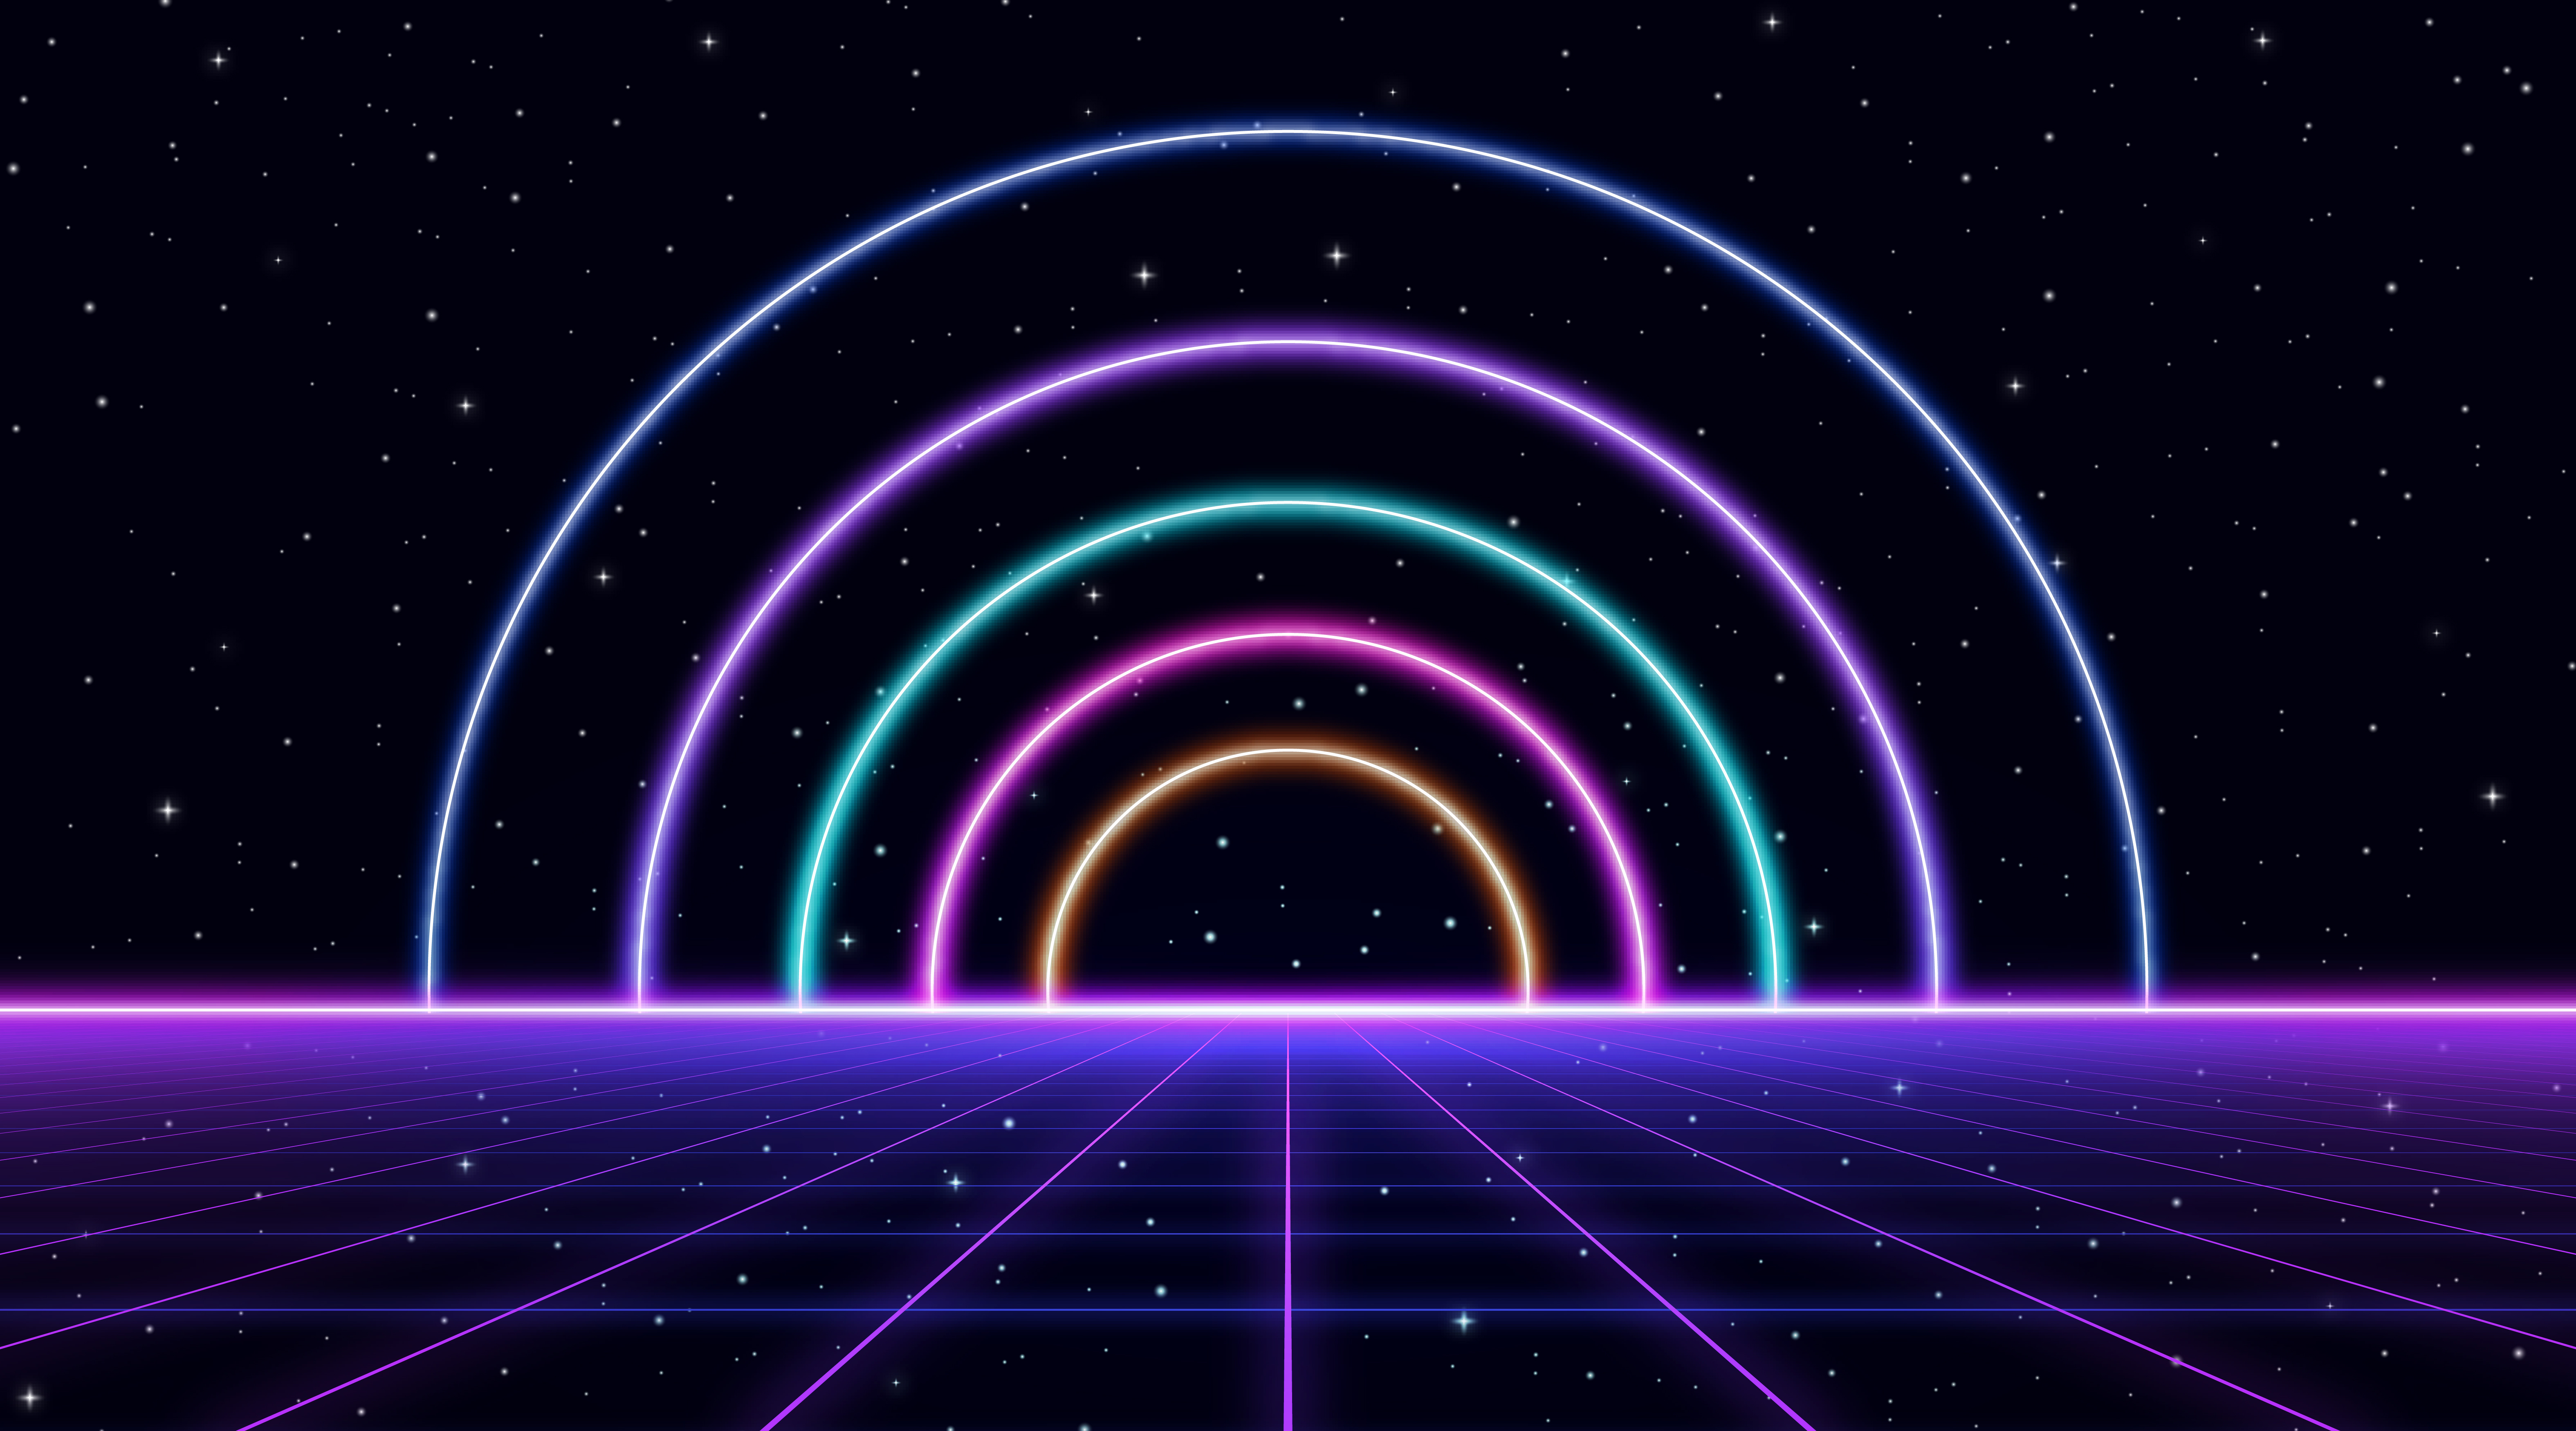 Abstract retro style 80's-90's Sci-Fi with laser grid landscape background.